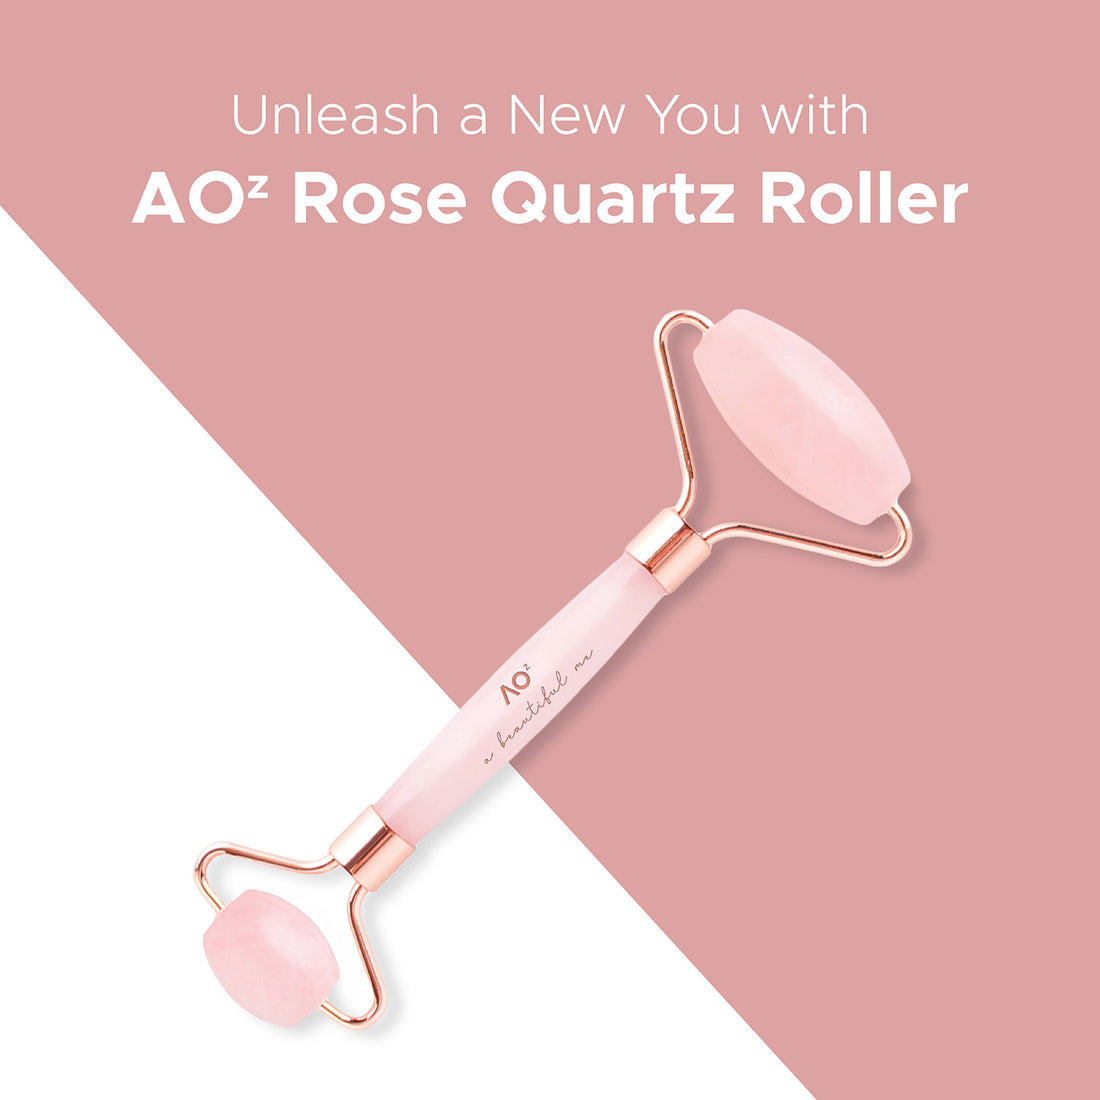 How to use the AOᶻ Rose Quartz Roller and how it benefits you!